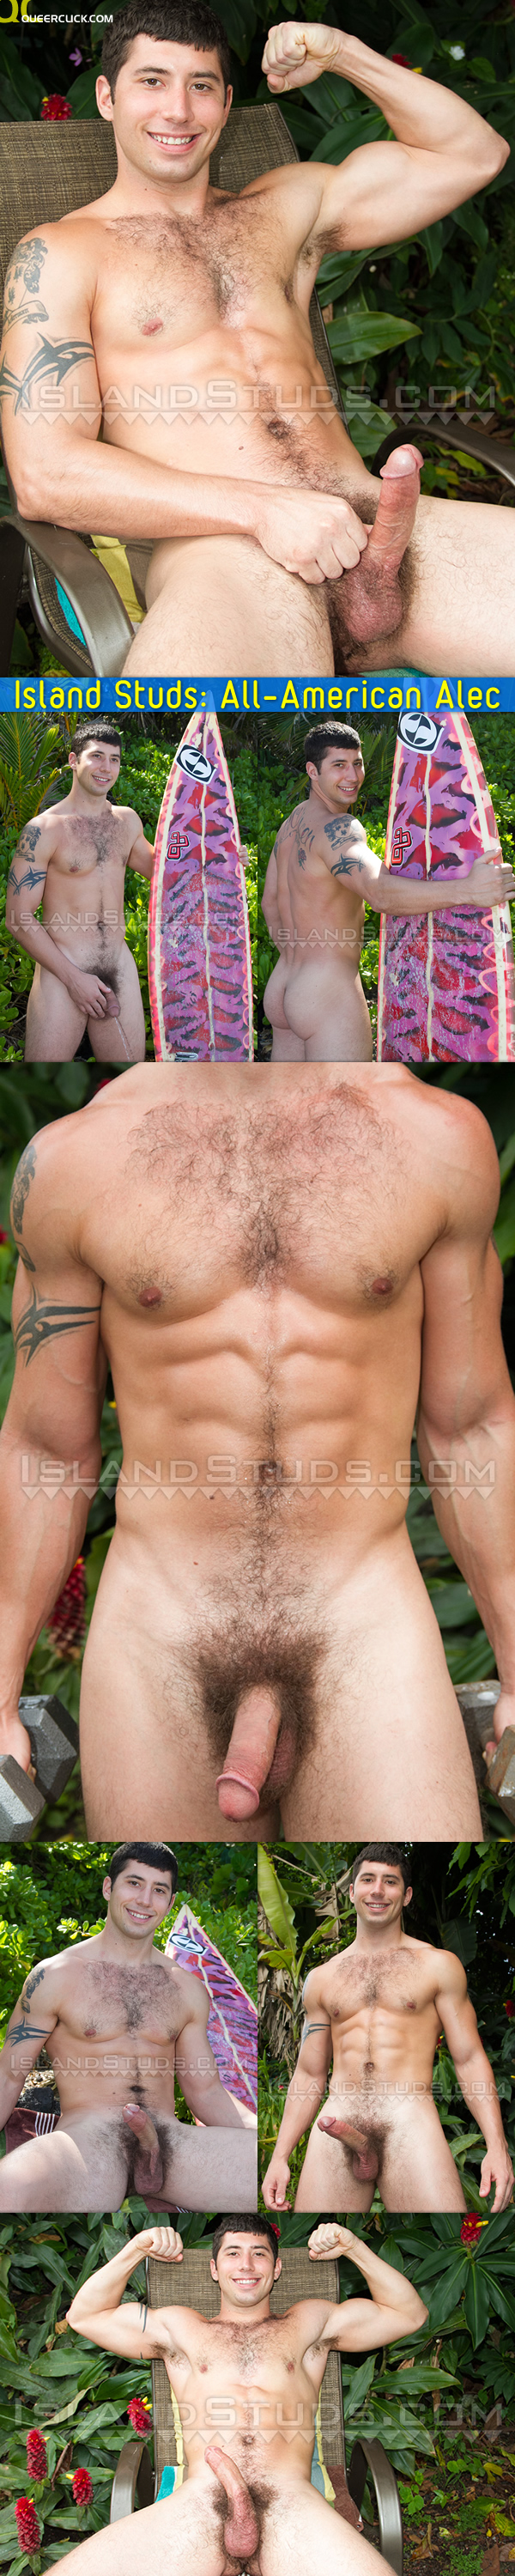 Island Studs: All-American Alec is Back! Big Dick Muscle Jock Surfs Naked & Busts Outdoors in Hawaii!